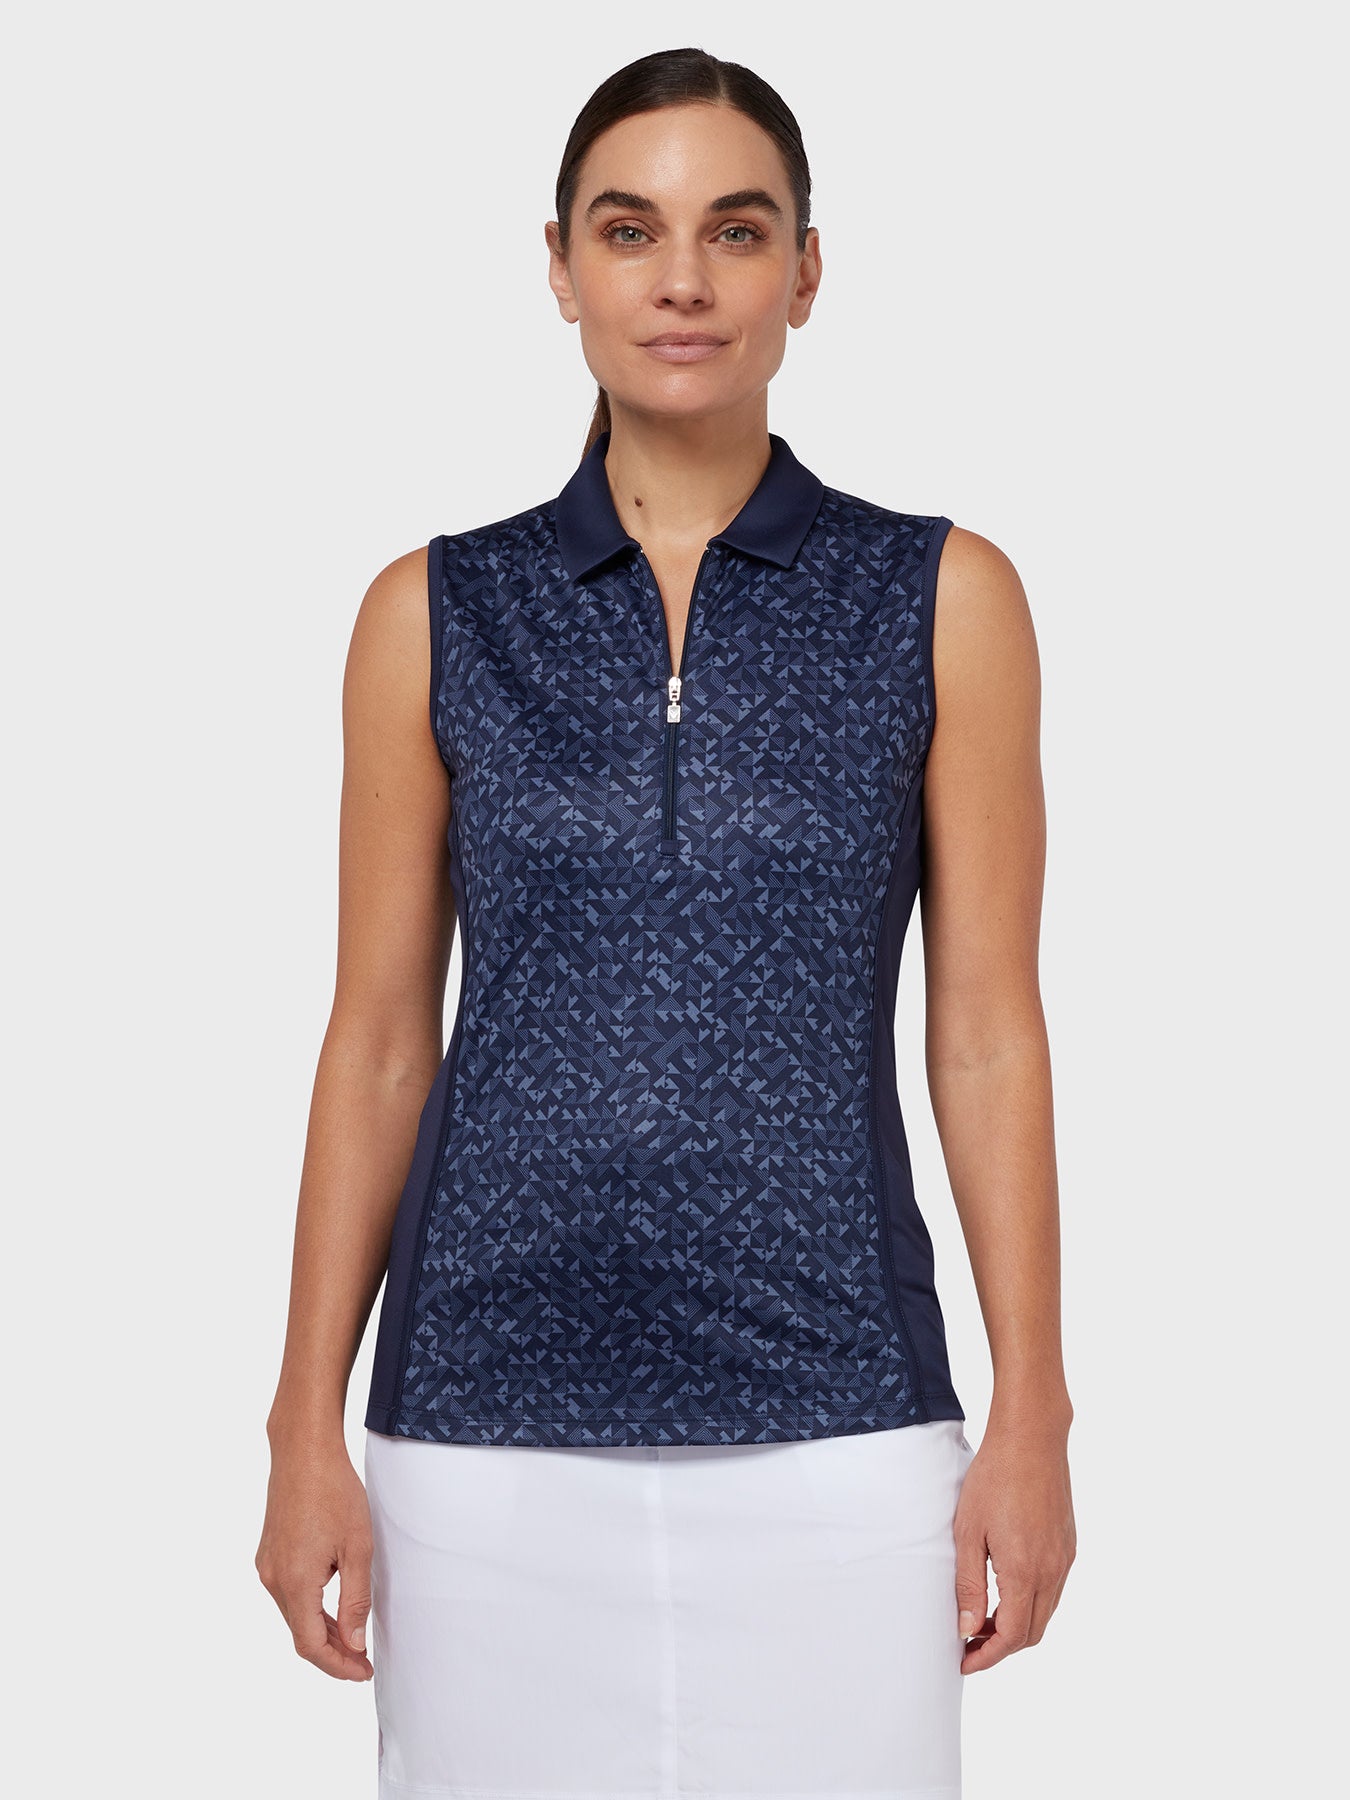 View Shape Shifter Geo Print Womens Golf Polo In Peacoat Peacoat XL information